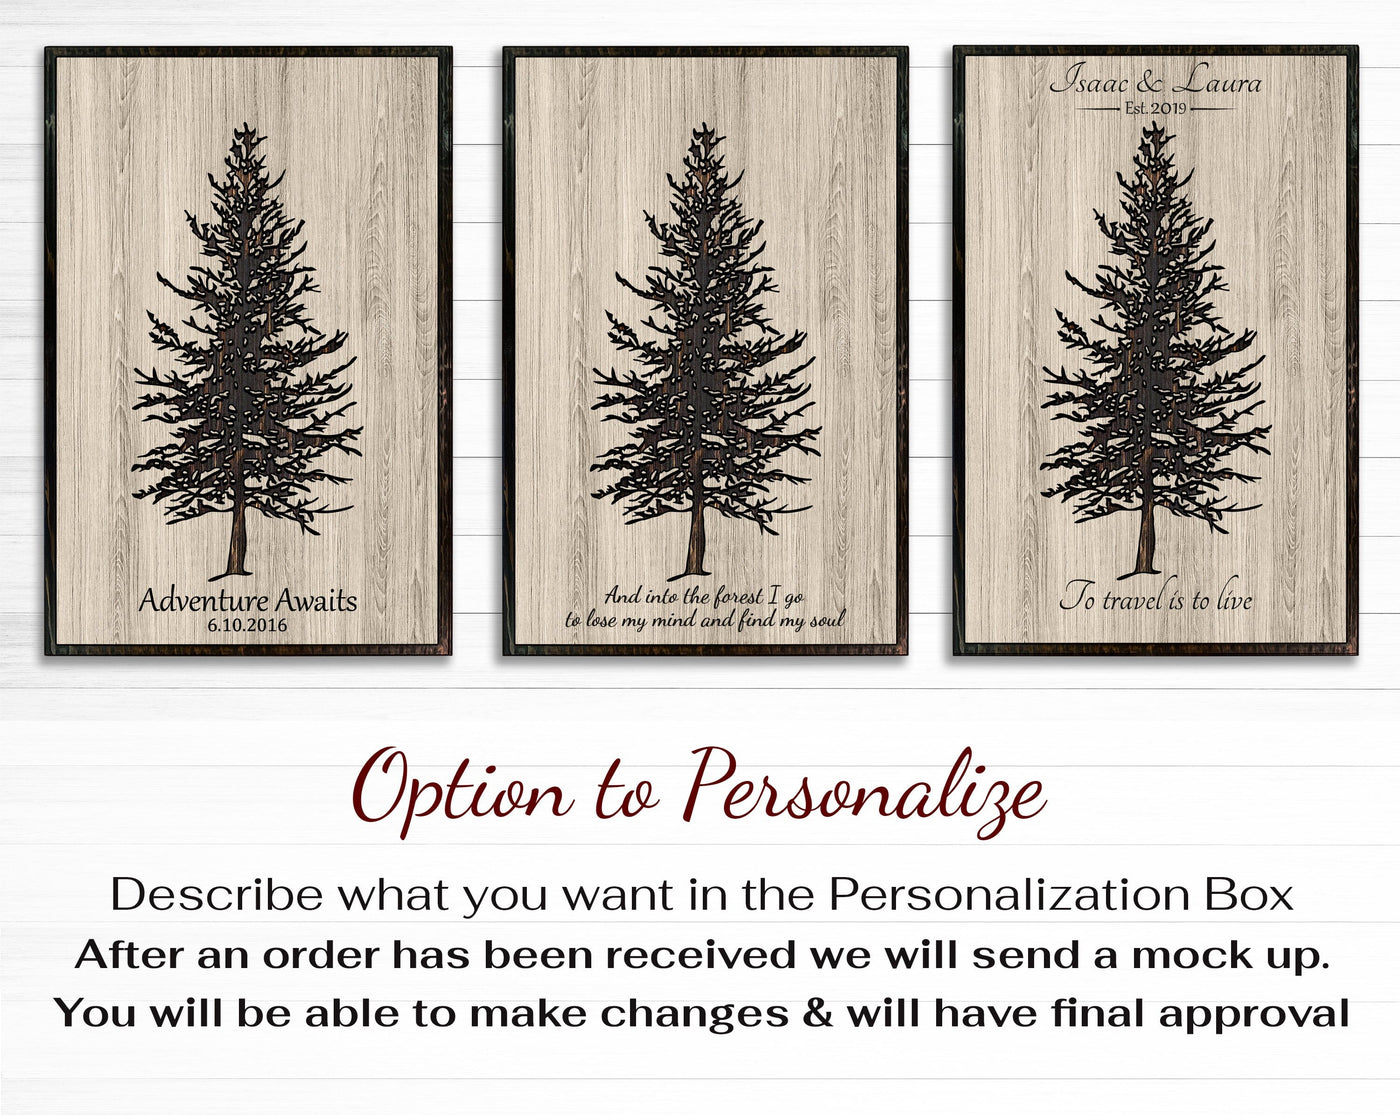 Custom Pine Tree Wood Wall Art: Handcrafted with precision, this stunning wood wall art features a beautifully carved evergreen tree design. Personalize with names, dates, or a special message for a heartfelt touch. A perfect addition to any room's decor, bringing the charm of nature and the warmth of personalization together.